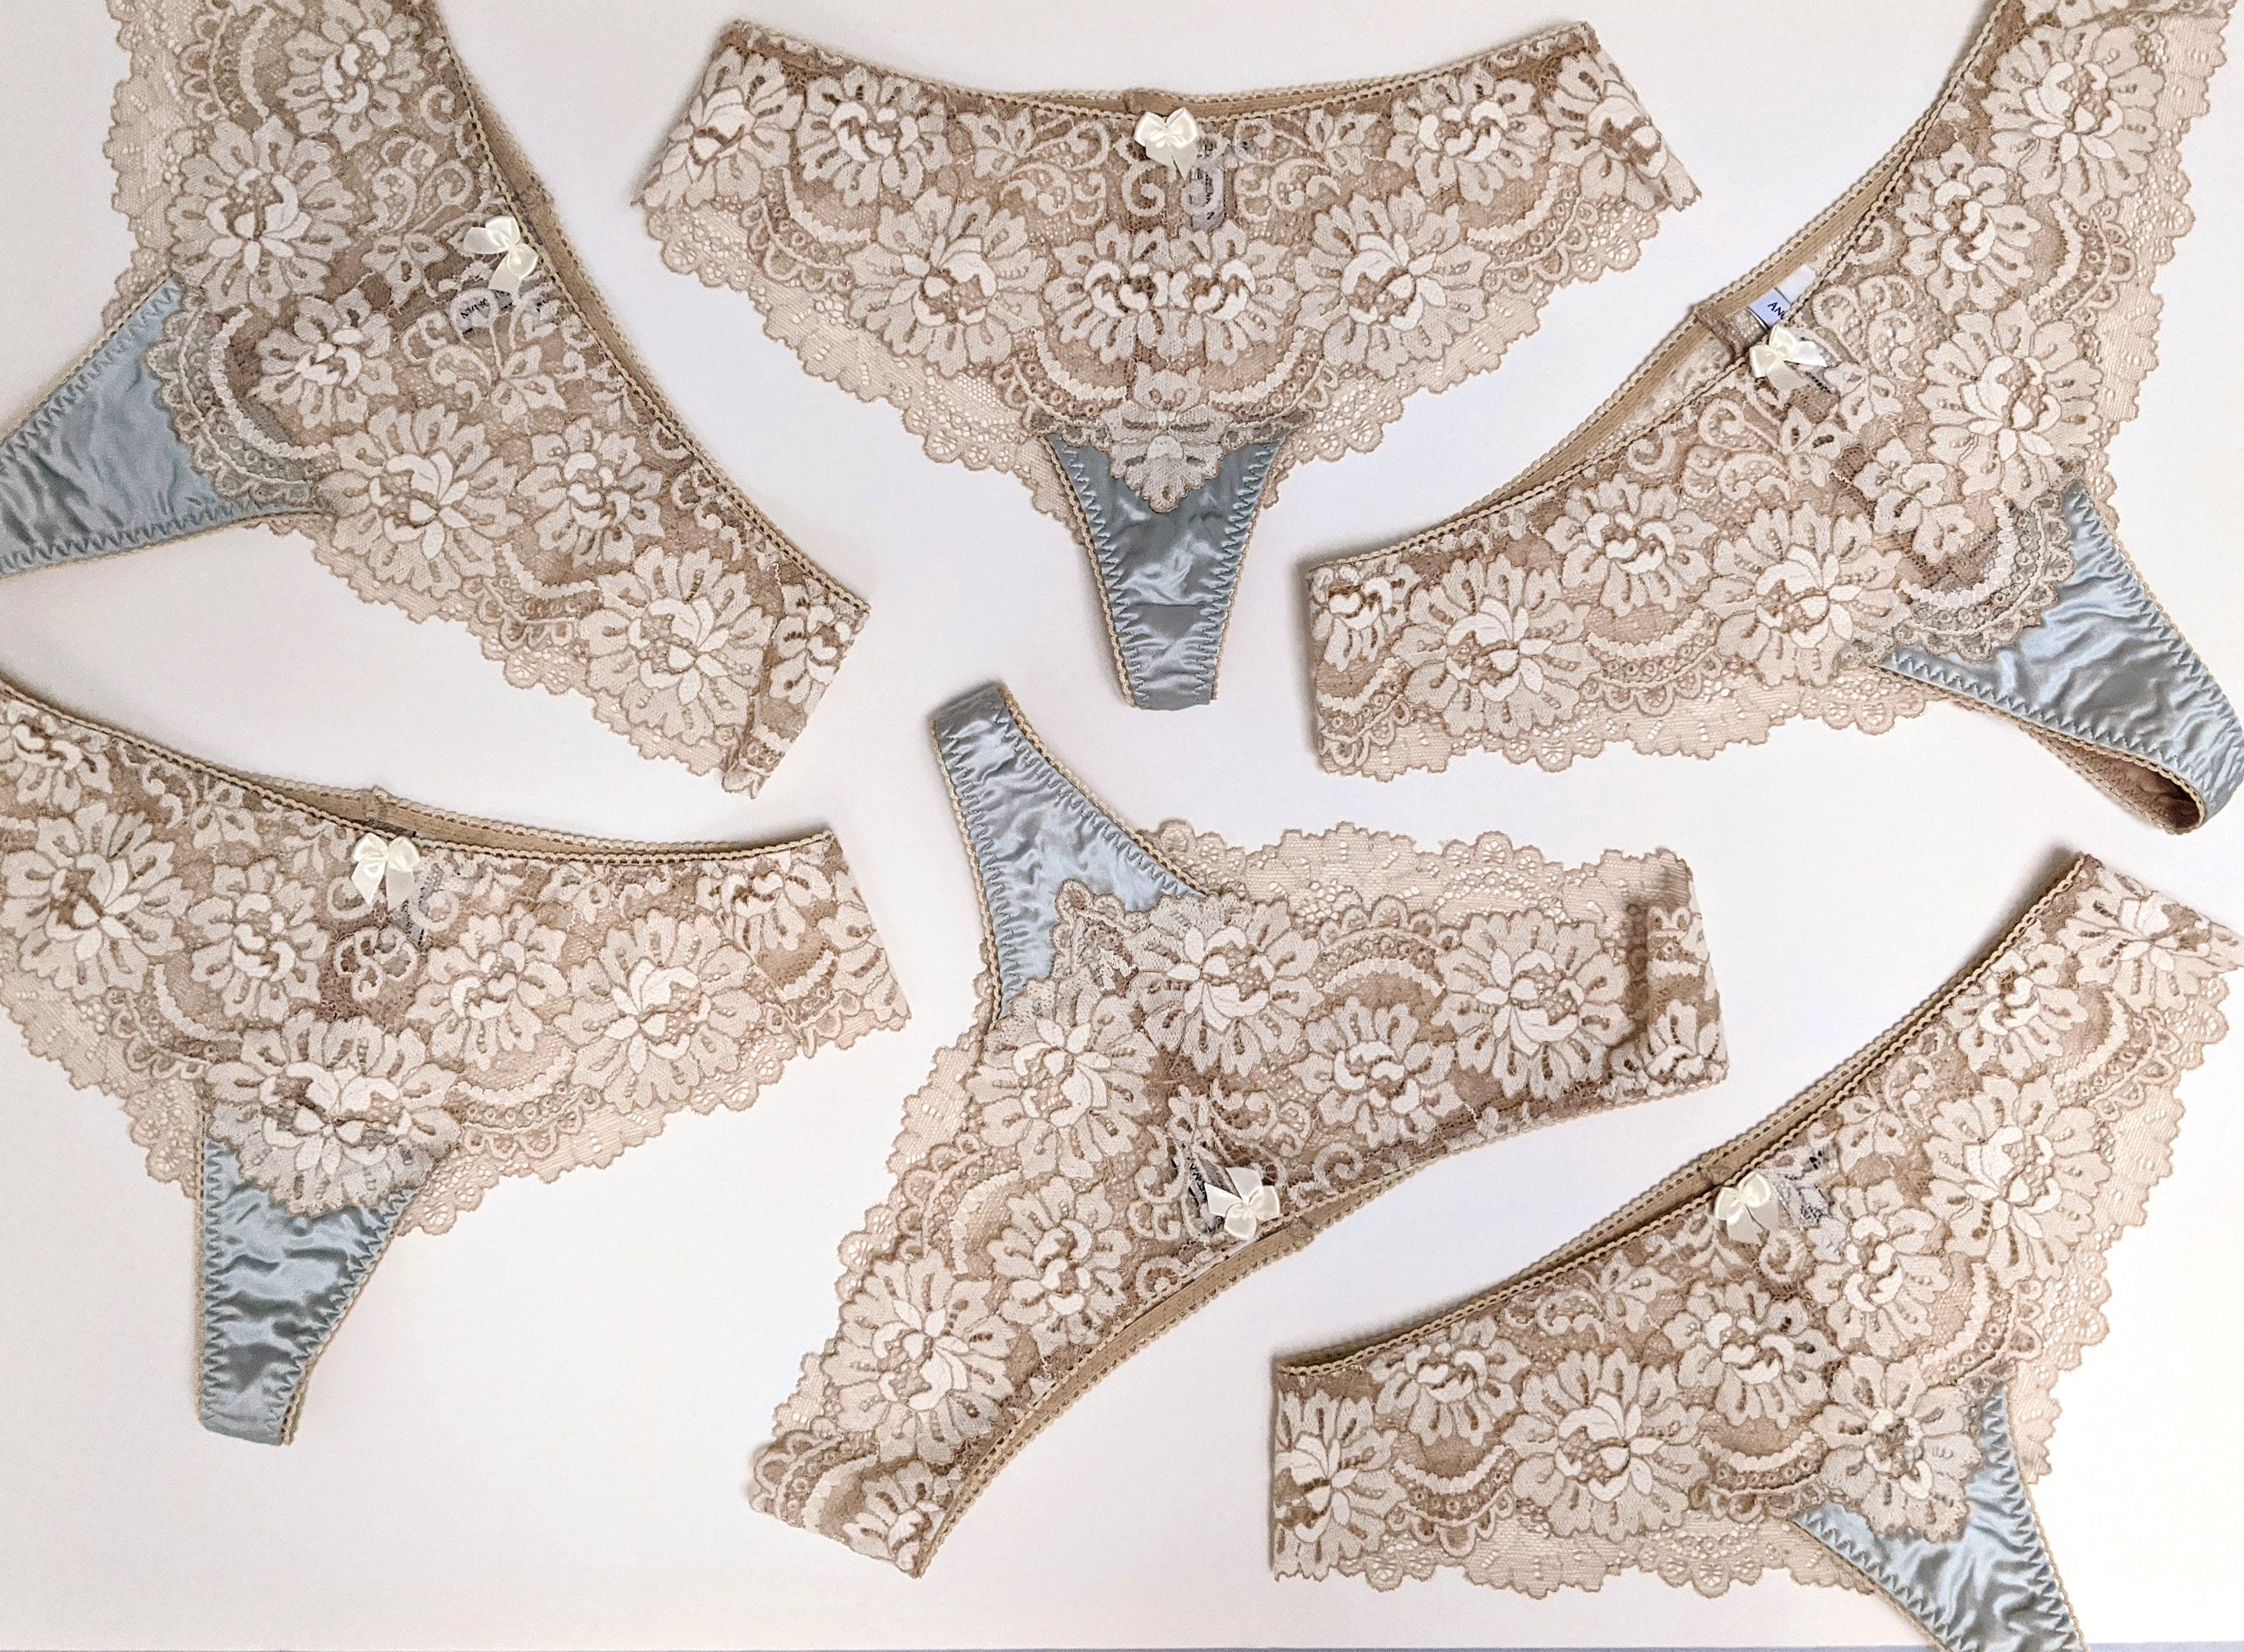 Cream and blue lace underwear and silk panties